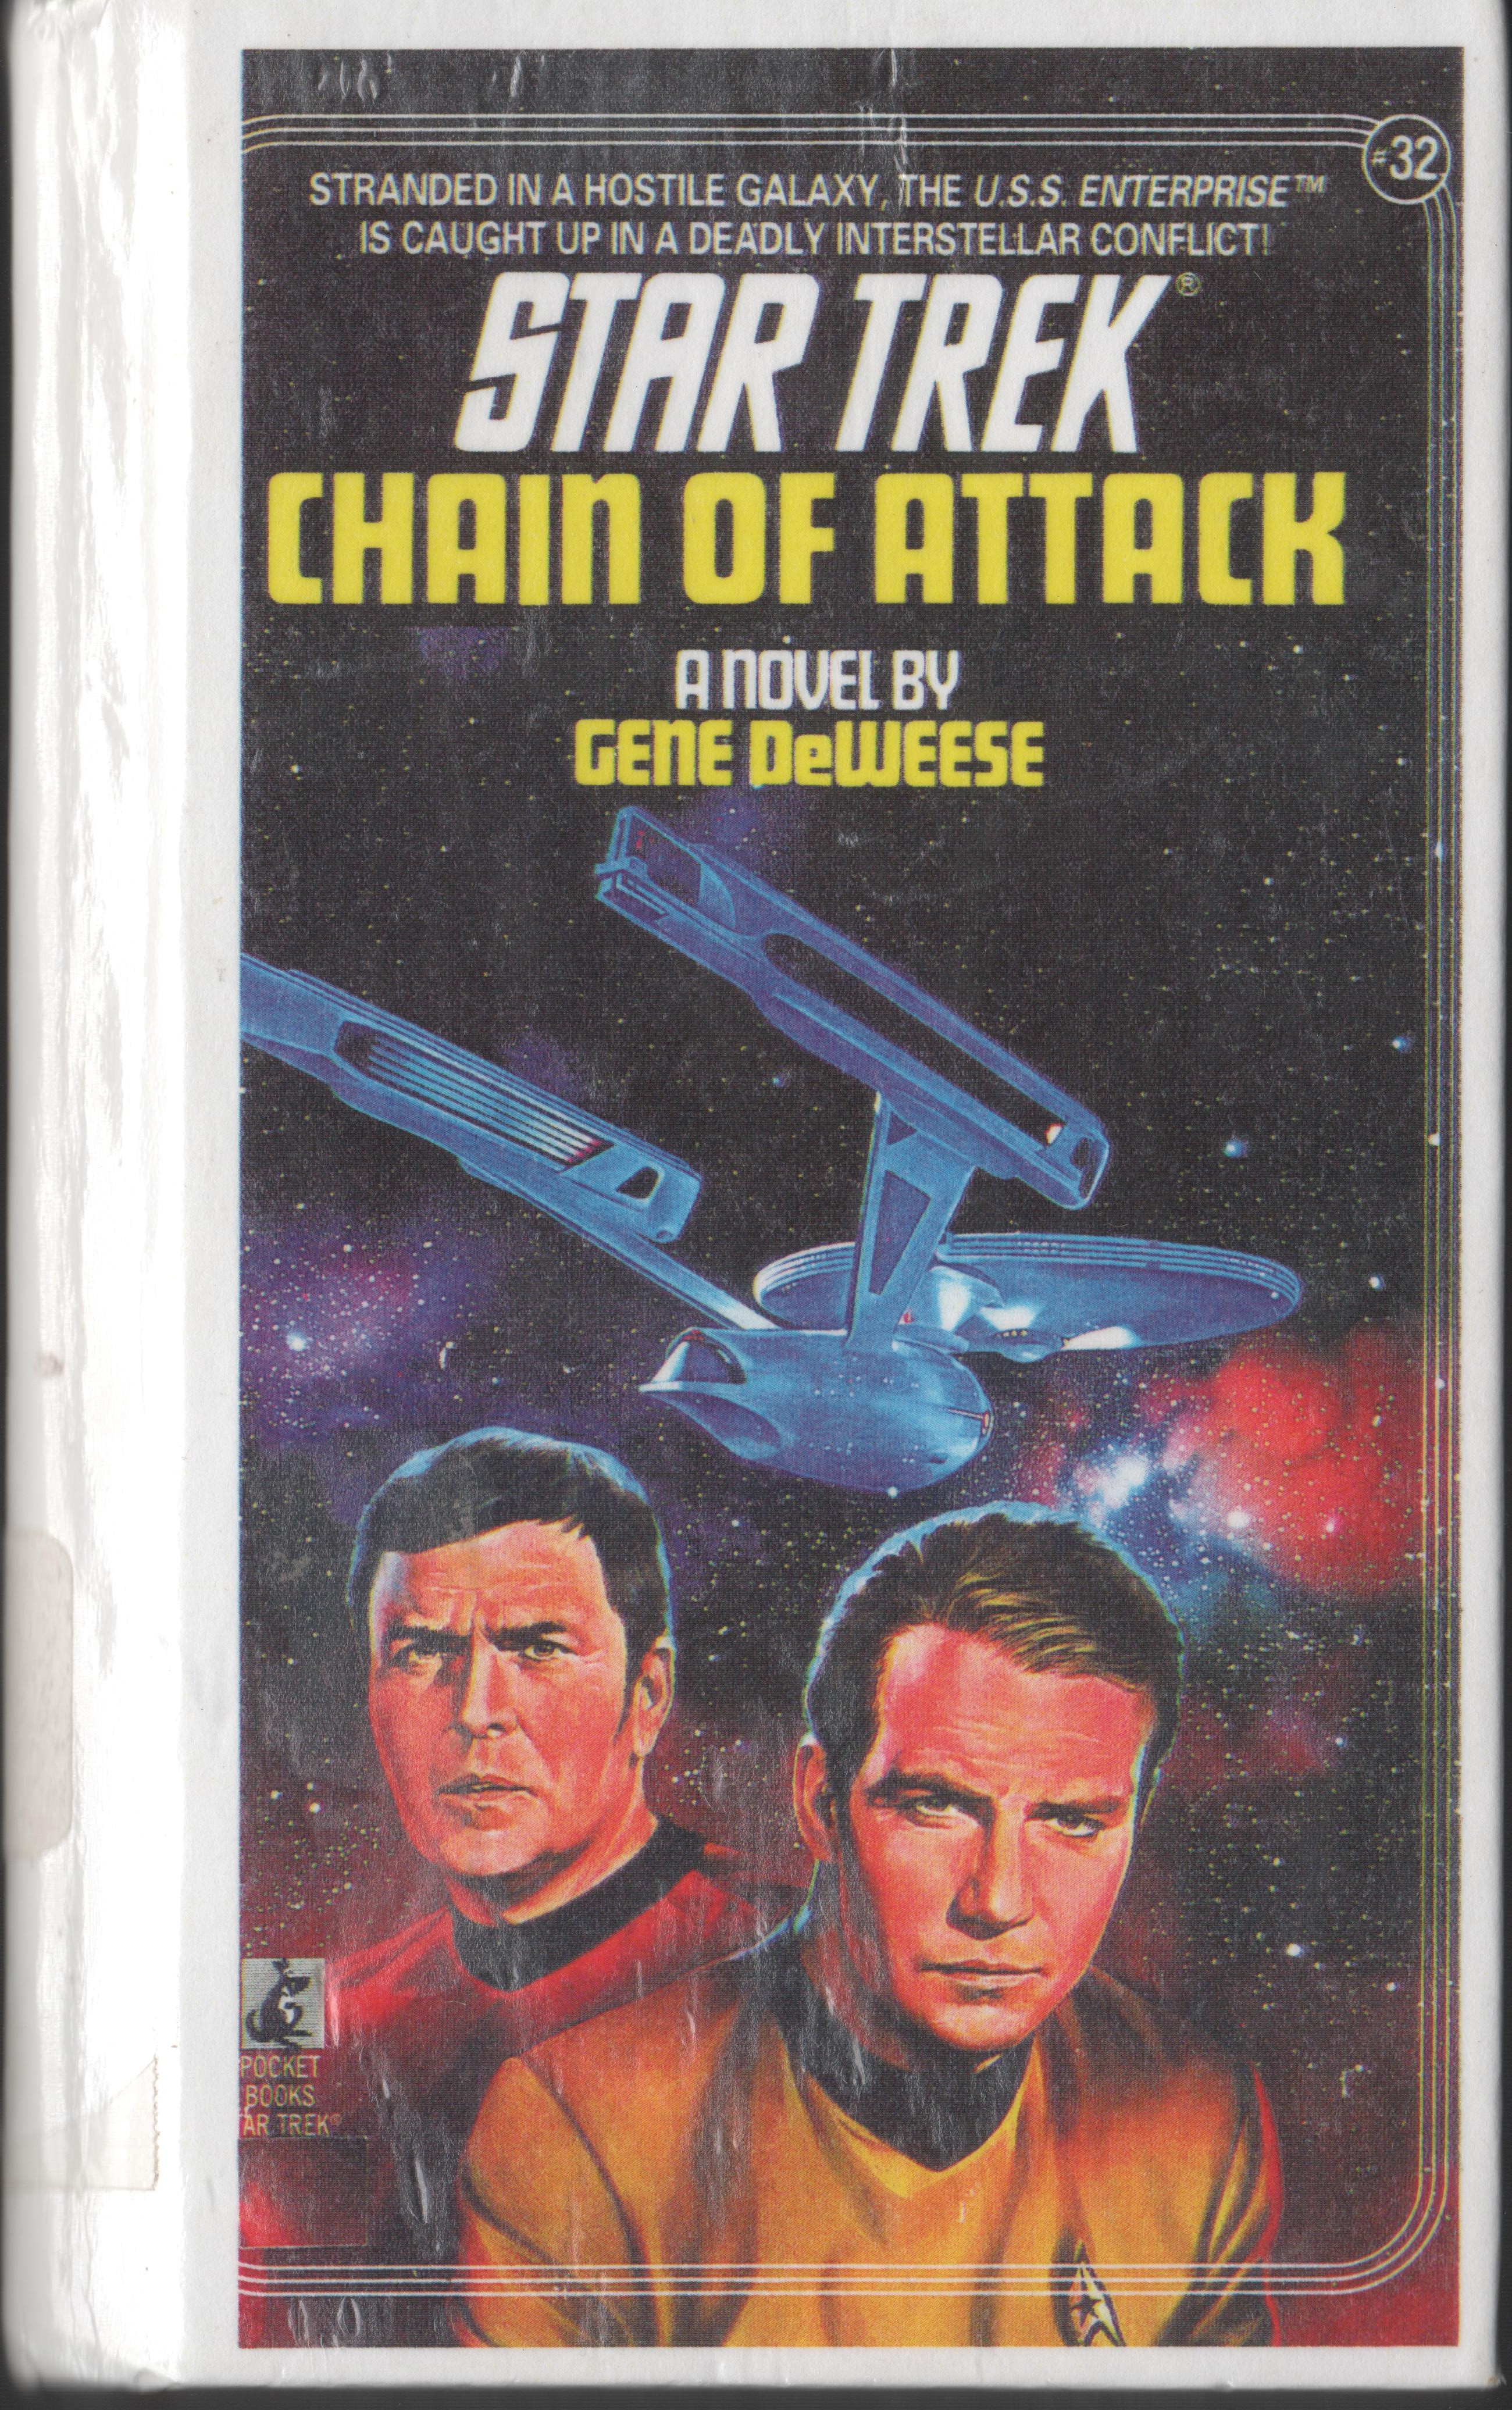 Star Trek 32 Chain of Attack Library Edition